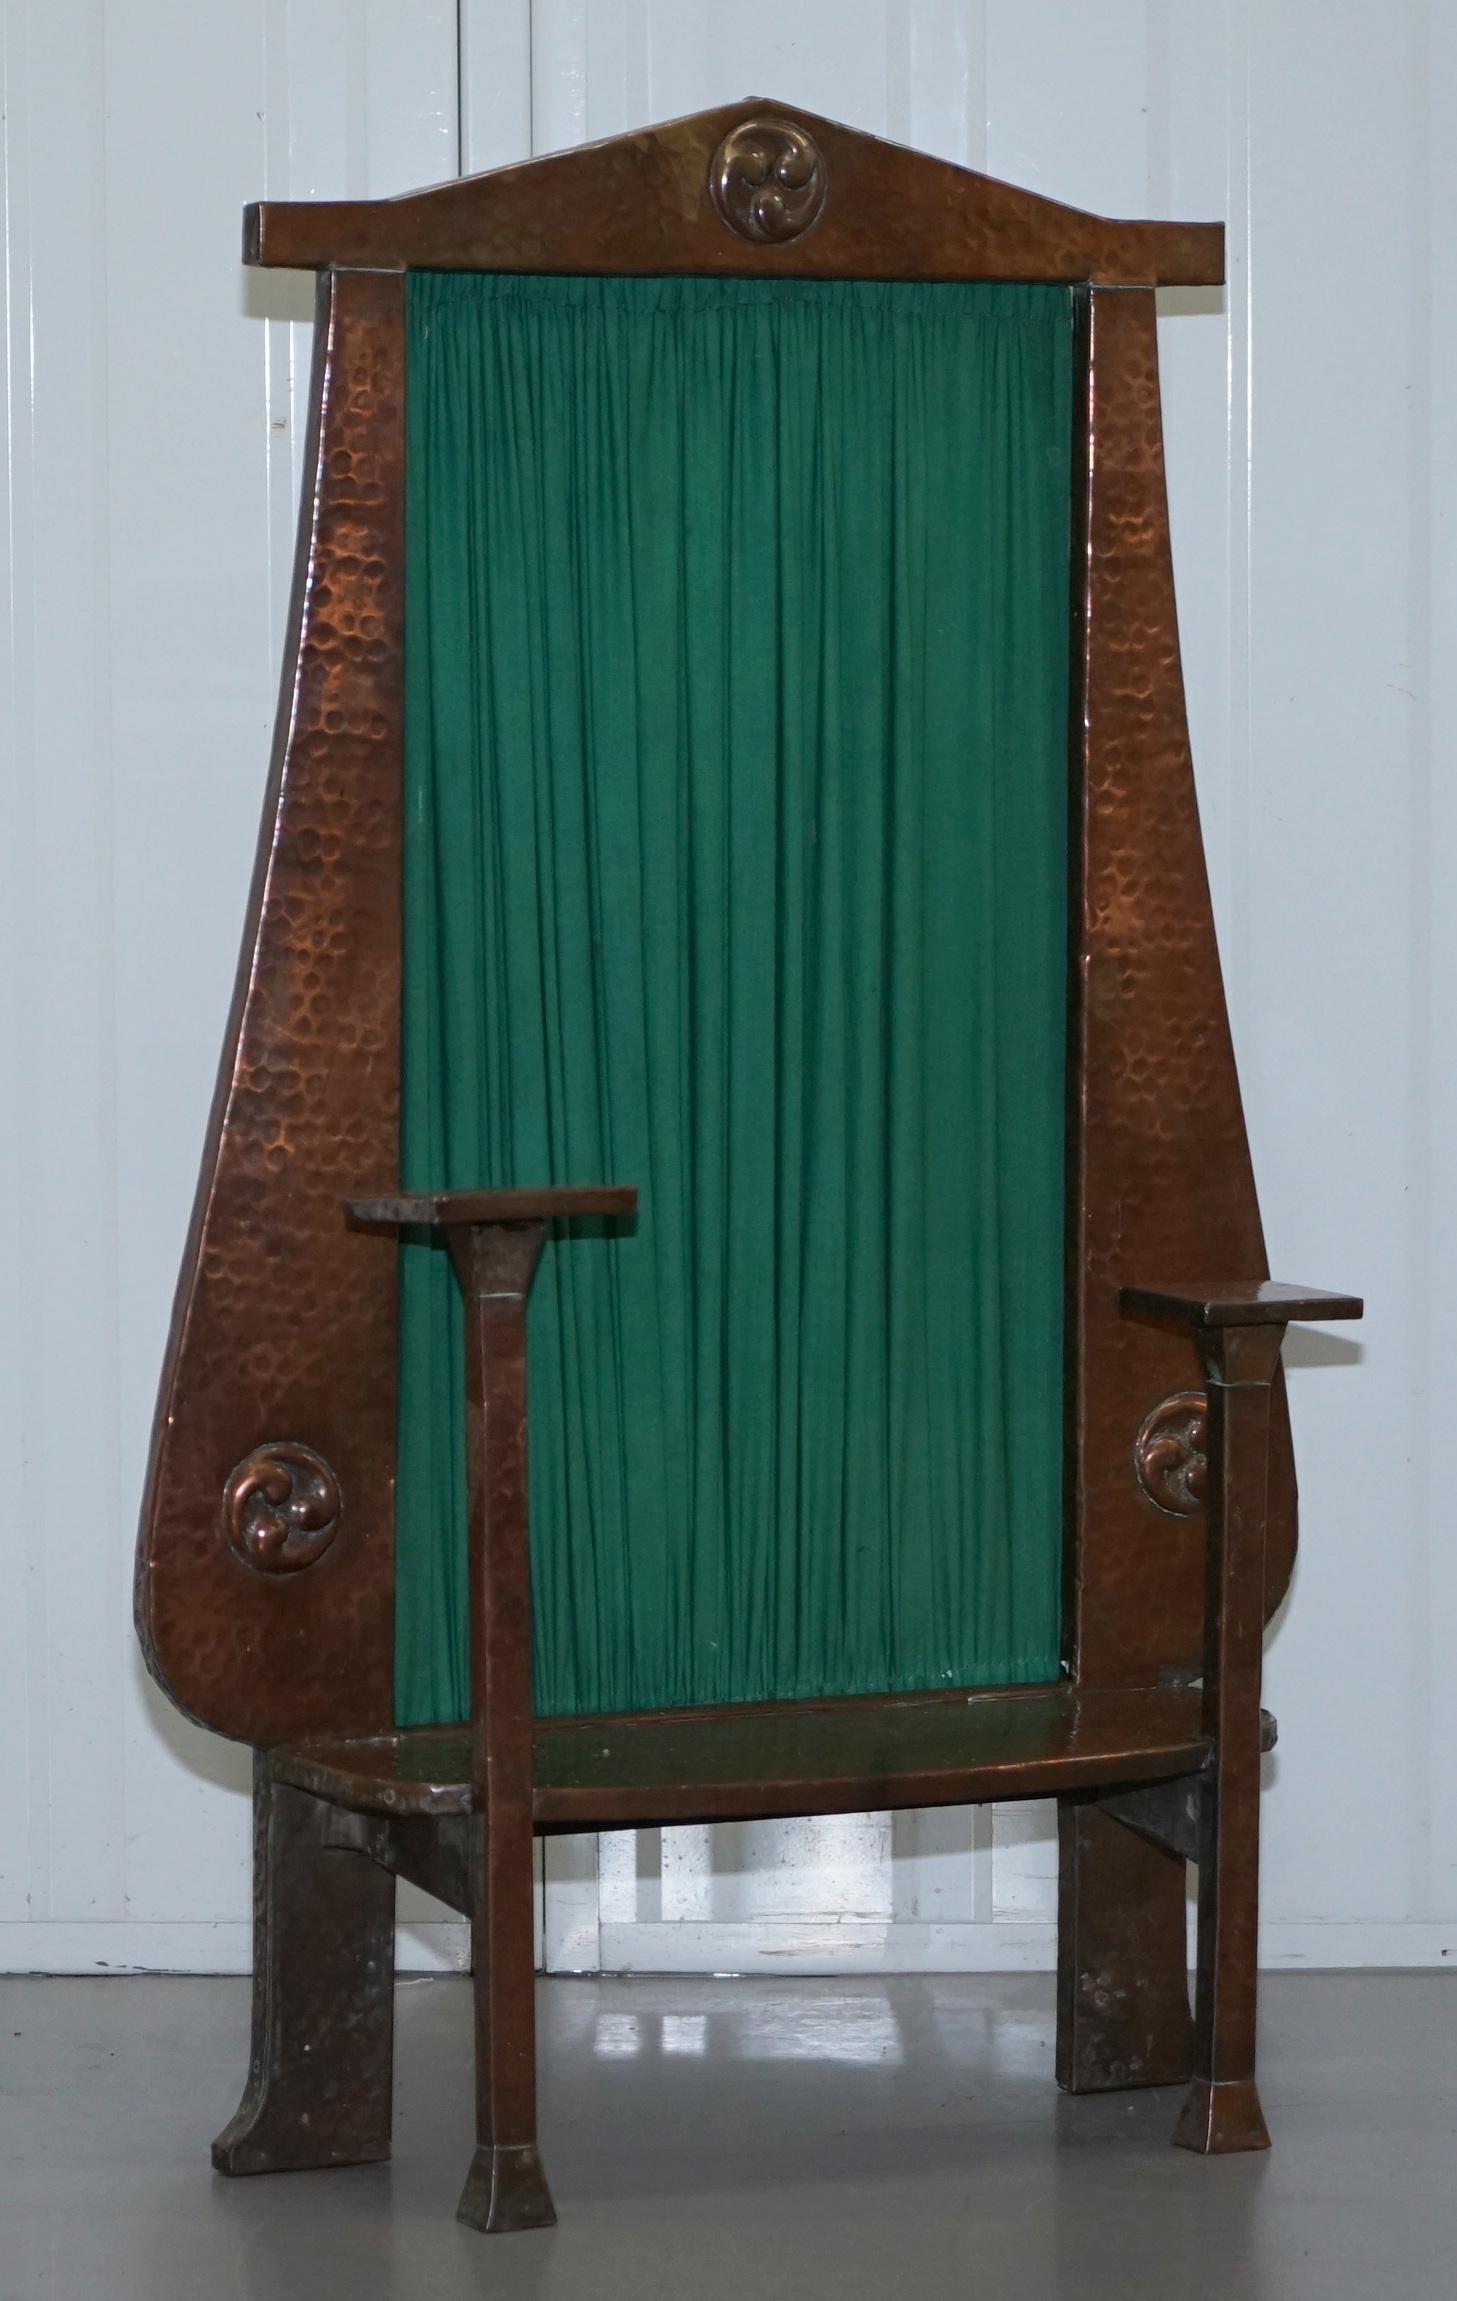 Wimbledon-Furniture

Wimbledon-Furniture is delighted to offer for sale this lovely hand-hammered copper Liberty’s London fire screen

Please note the delivery fee listed is just a guide, it covers within the M25 only, for an accurate quote